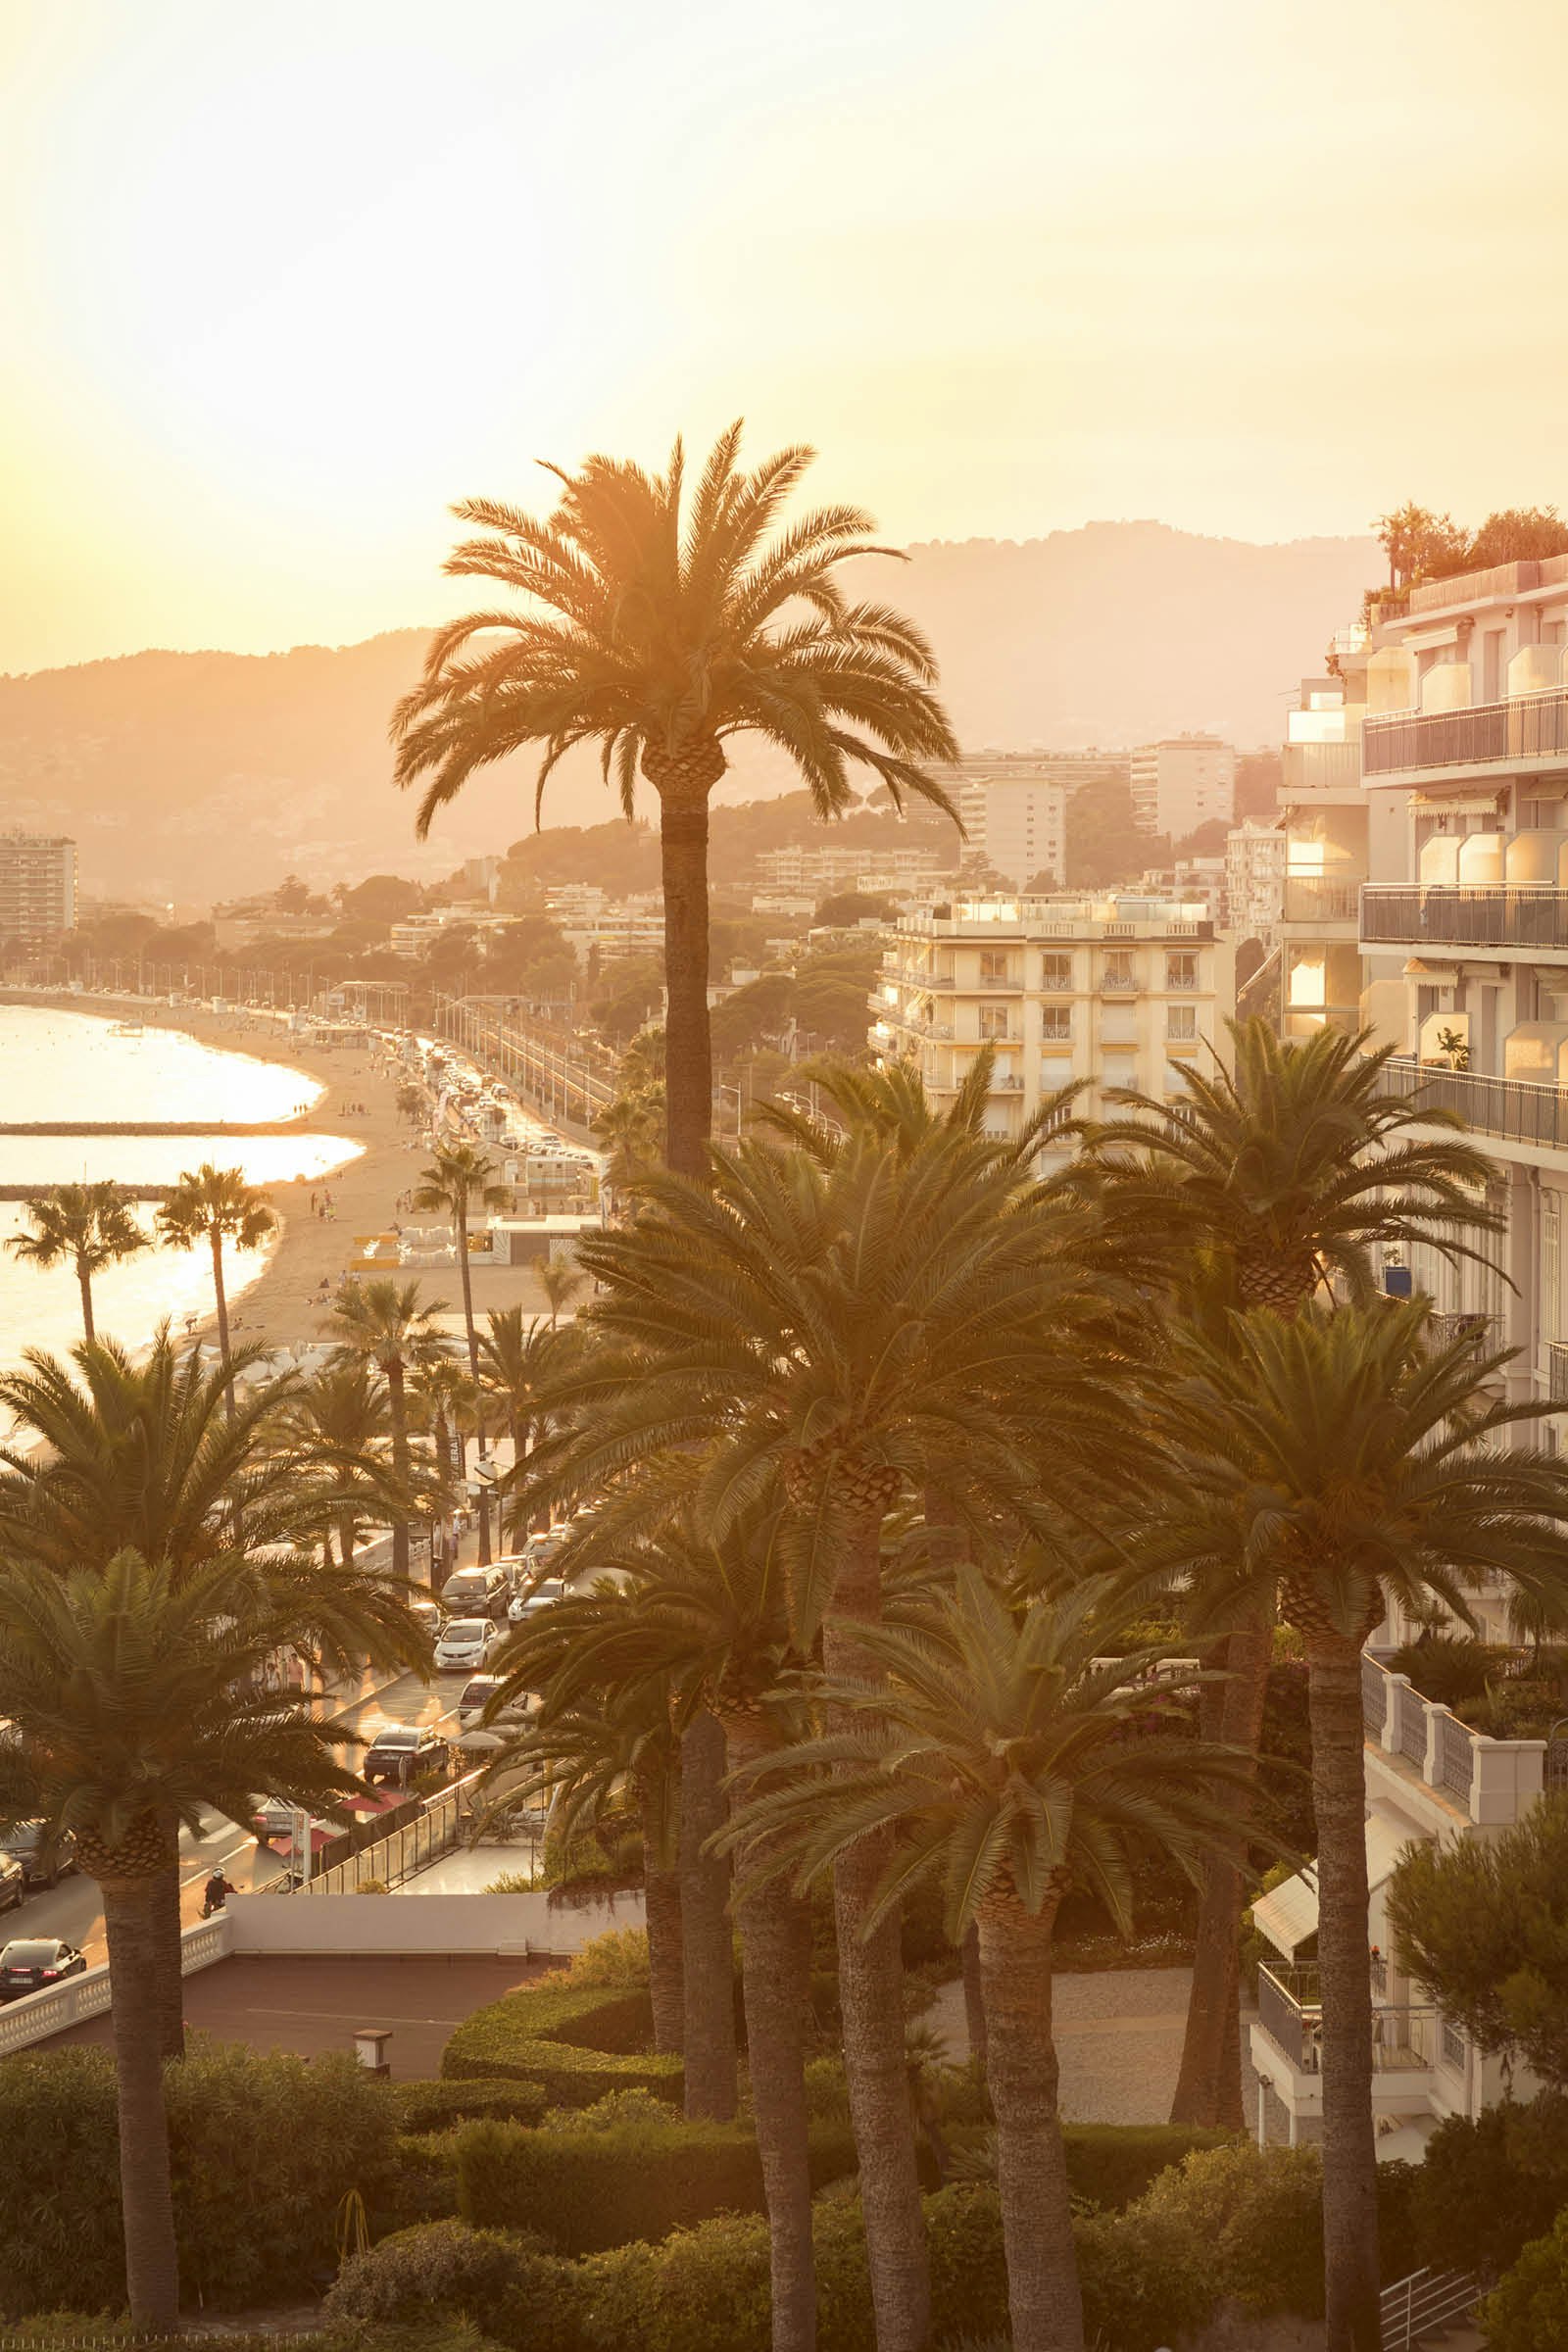 Evening view of palm trees along Cannes' western beach